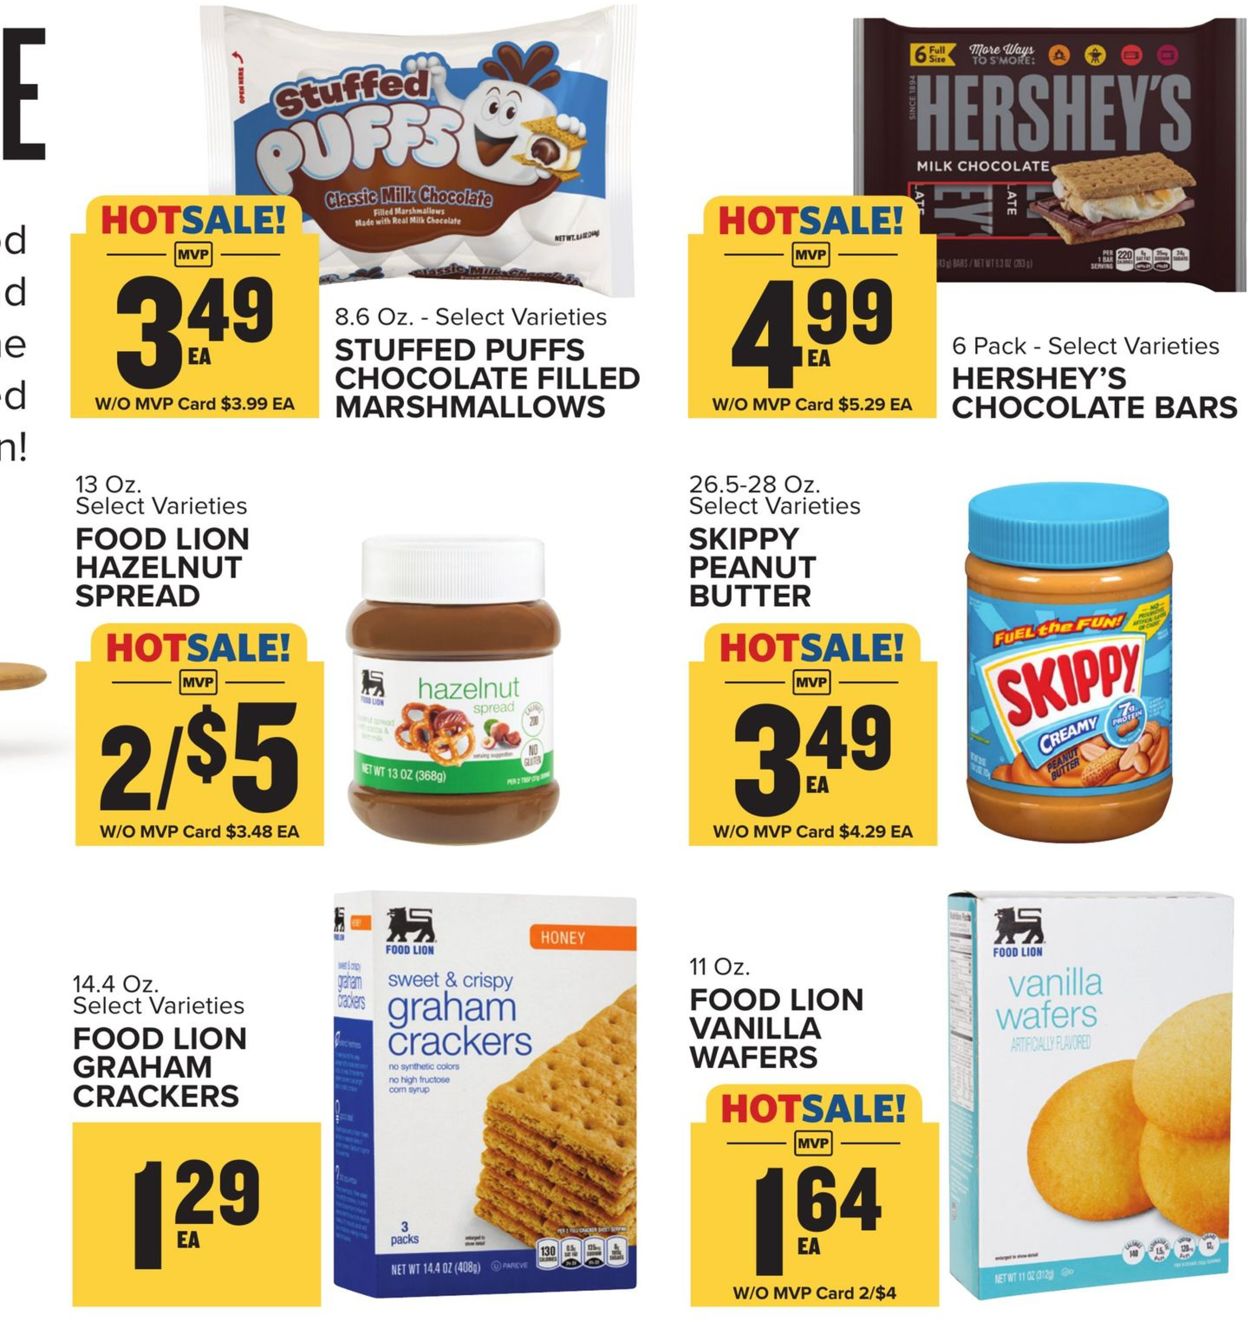 Food Lion Ad from 05/19/2021